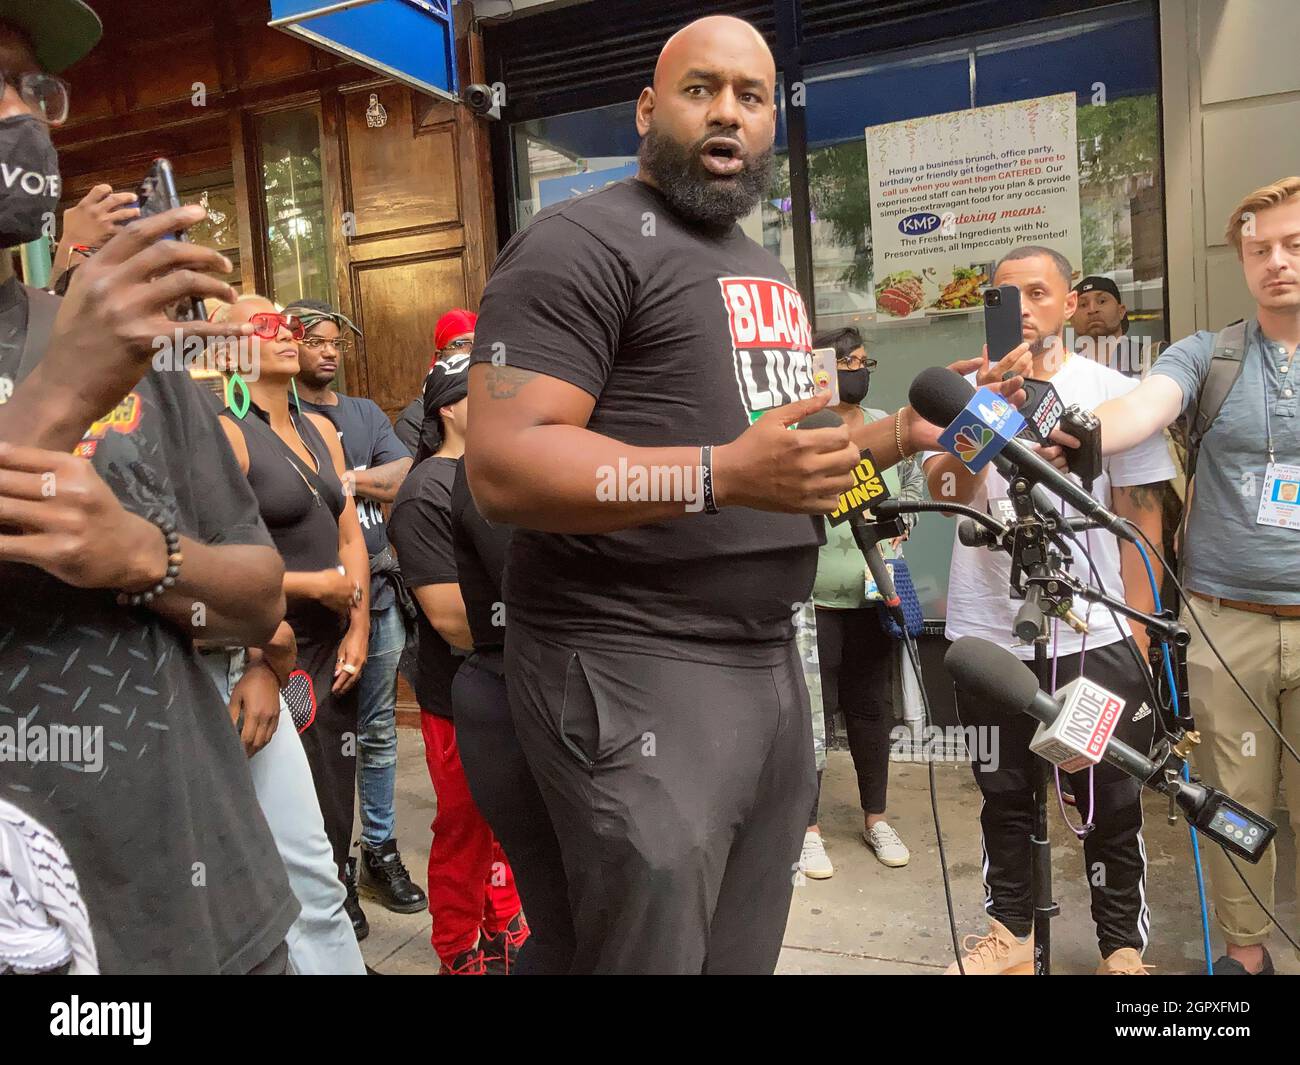 Black Lives Matter Greater New York co-founder and chairman Hawk Newsome speaks to the assembled media outside of Carmine’s Restaurant in the Upper West Side neighborhood of New York on Monday, September 20, 2021 about the alleged racially charged incident involving black customers and the hostess of the restaurant.  (© Frances M. Roberts) Stock Photo